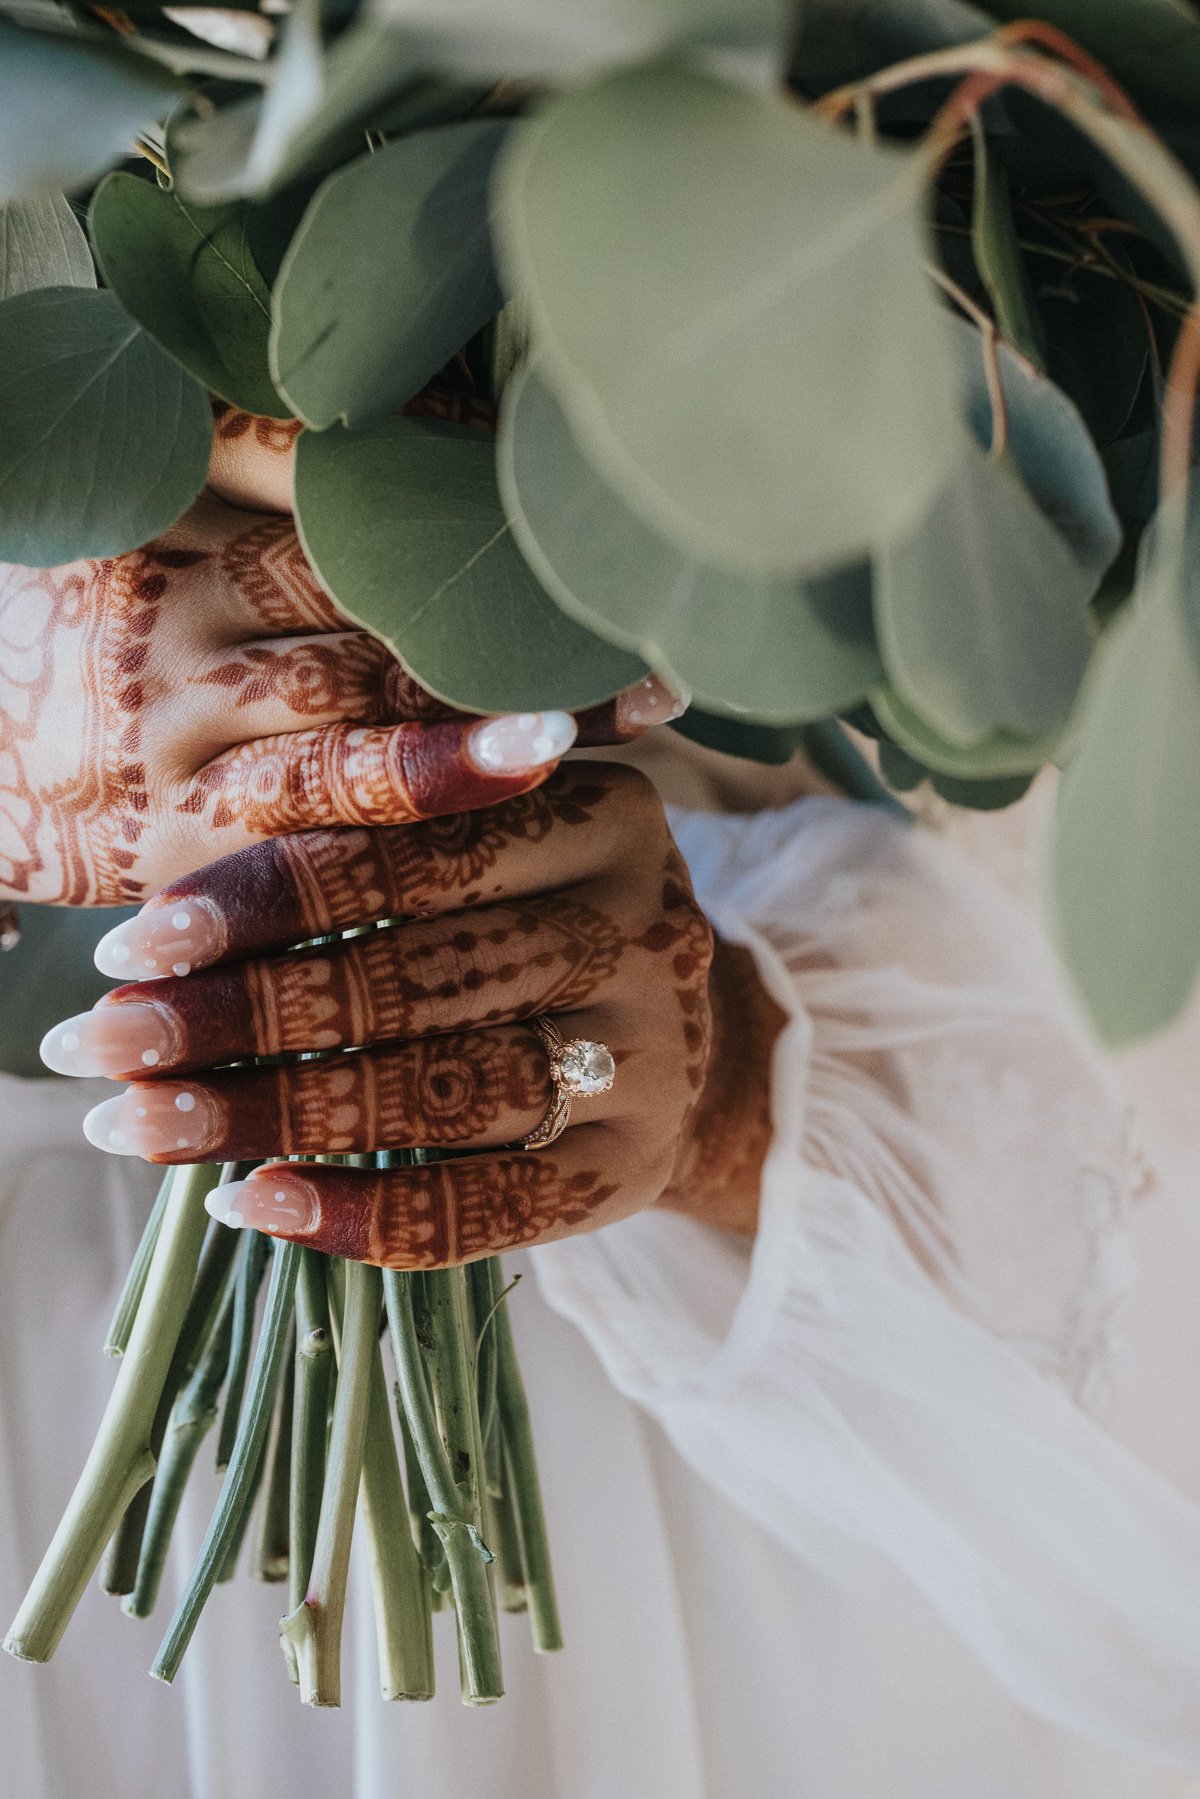    Detail photograph of a bride's hands delicately holding her floral bouquet, showcasing the intricate designs and vibrant colors by Moments by Frank.   